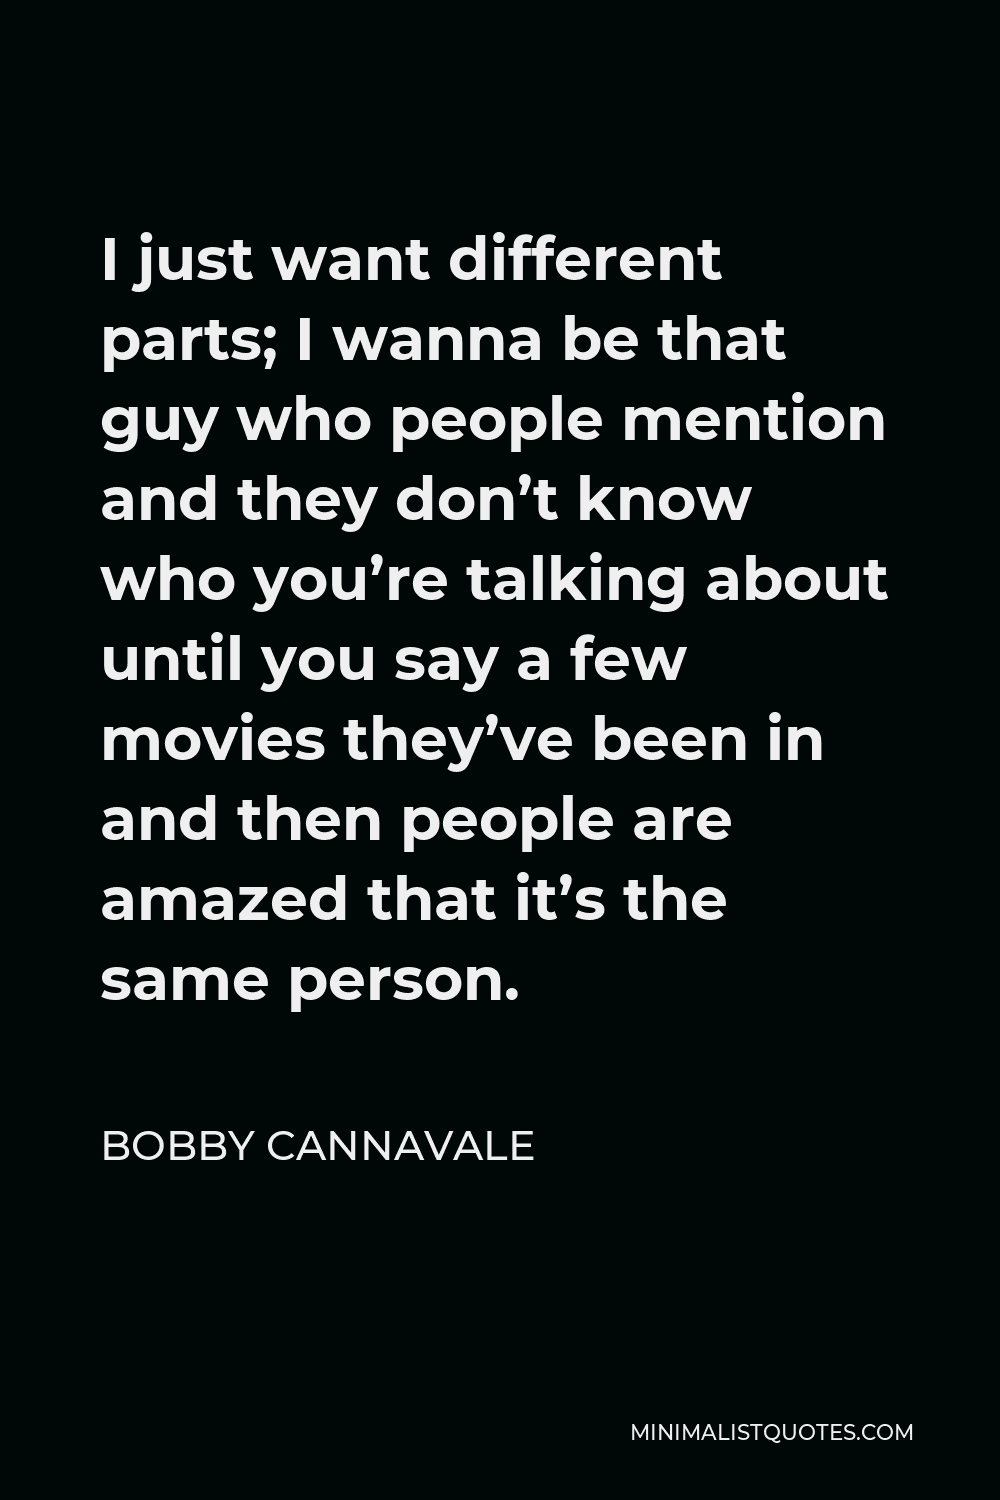 Bobby Cannavale Quote - I just want different parts; I wanna be that guy who people mention and they don’t know who you’re talking about until you say a few movies they’ve been in and then people are amazed that it’s the same person.